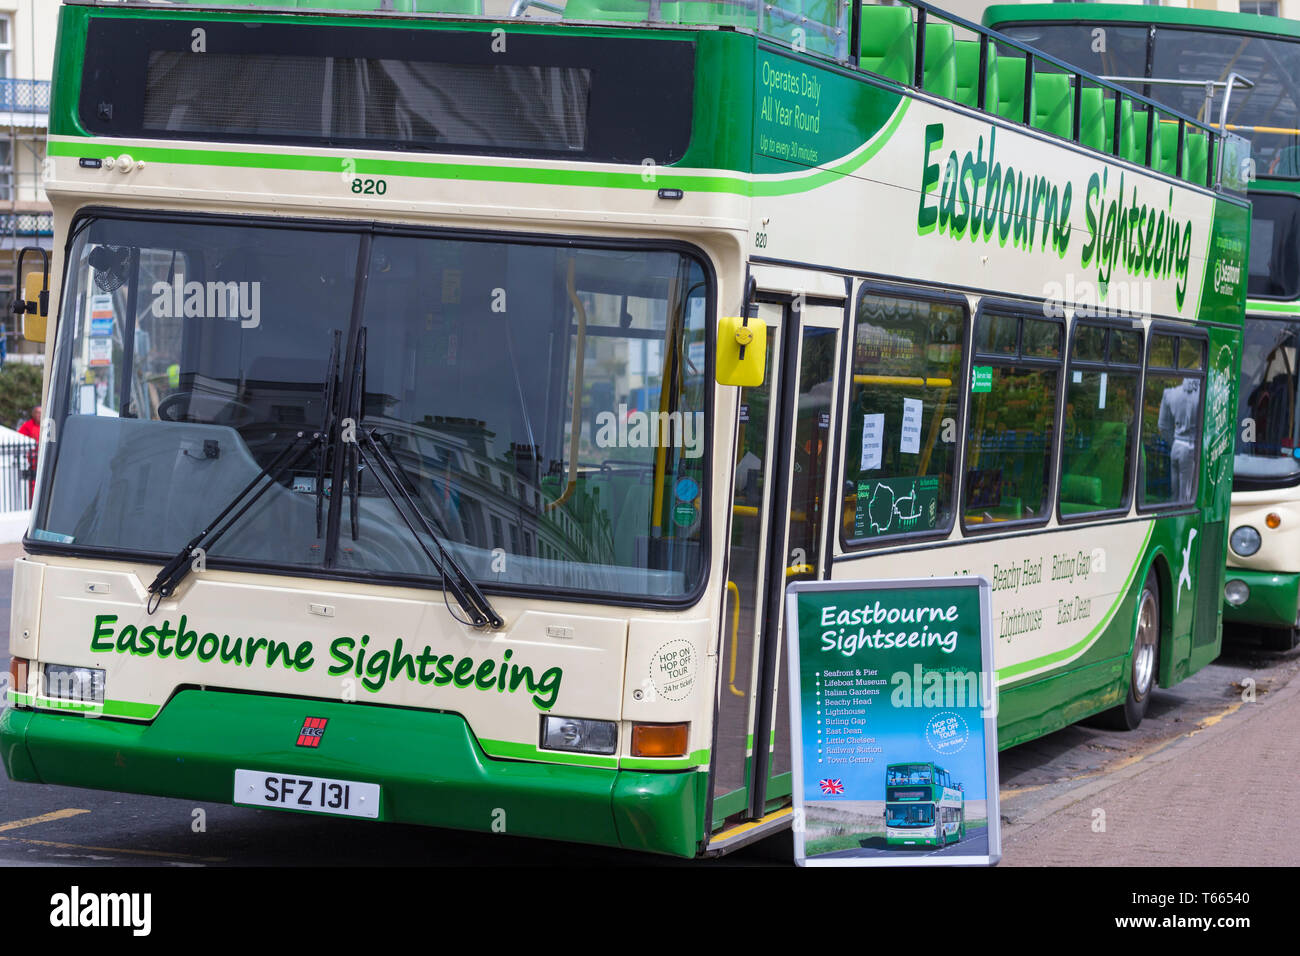 Eastbourne sightseeing coach bus, eastbourne, east sussex, uk Stock Photo